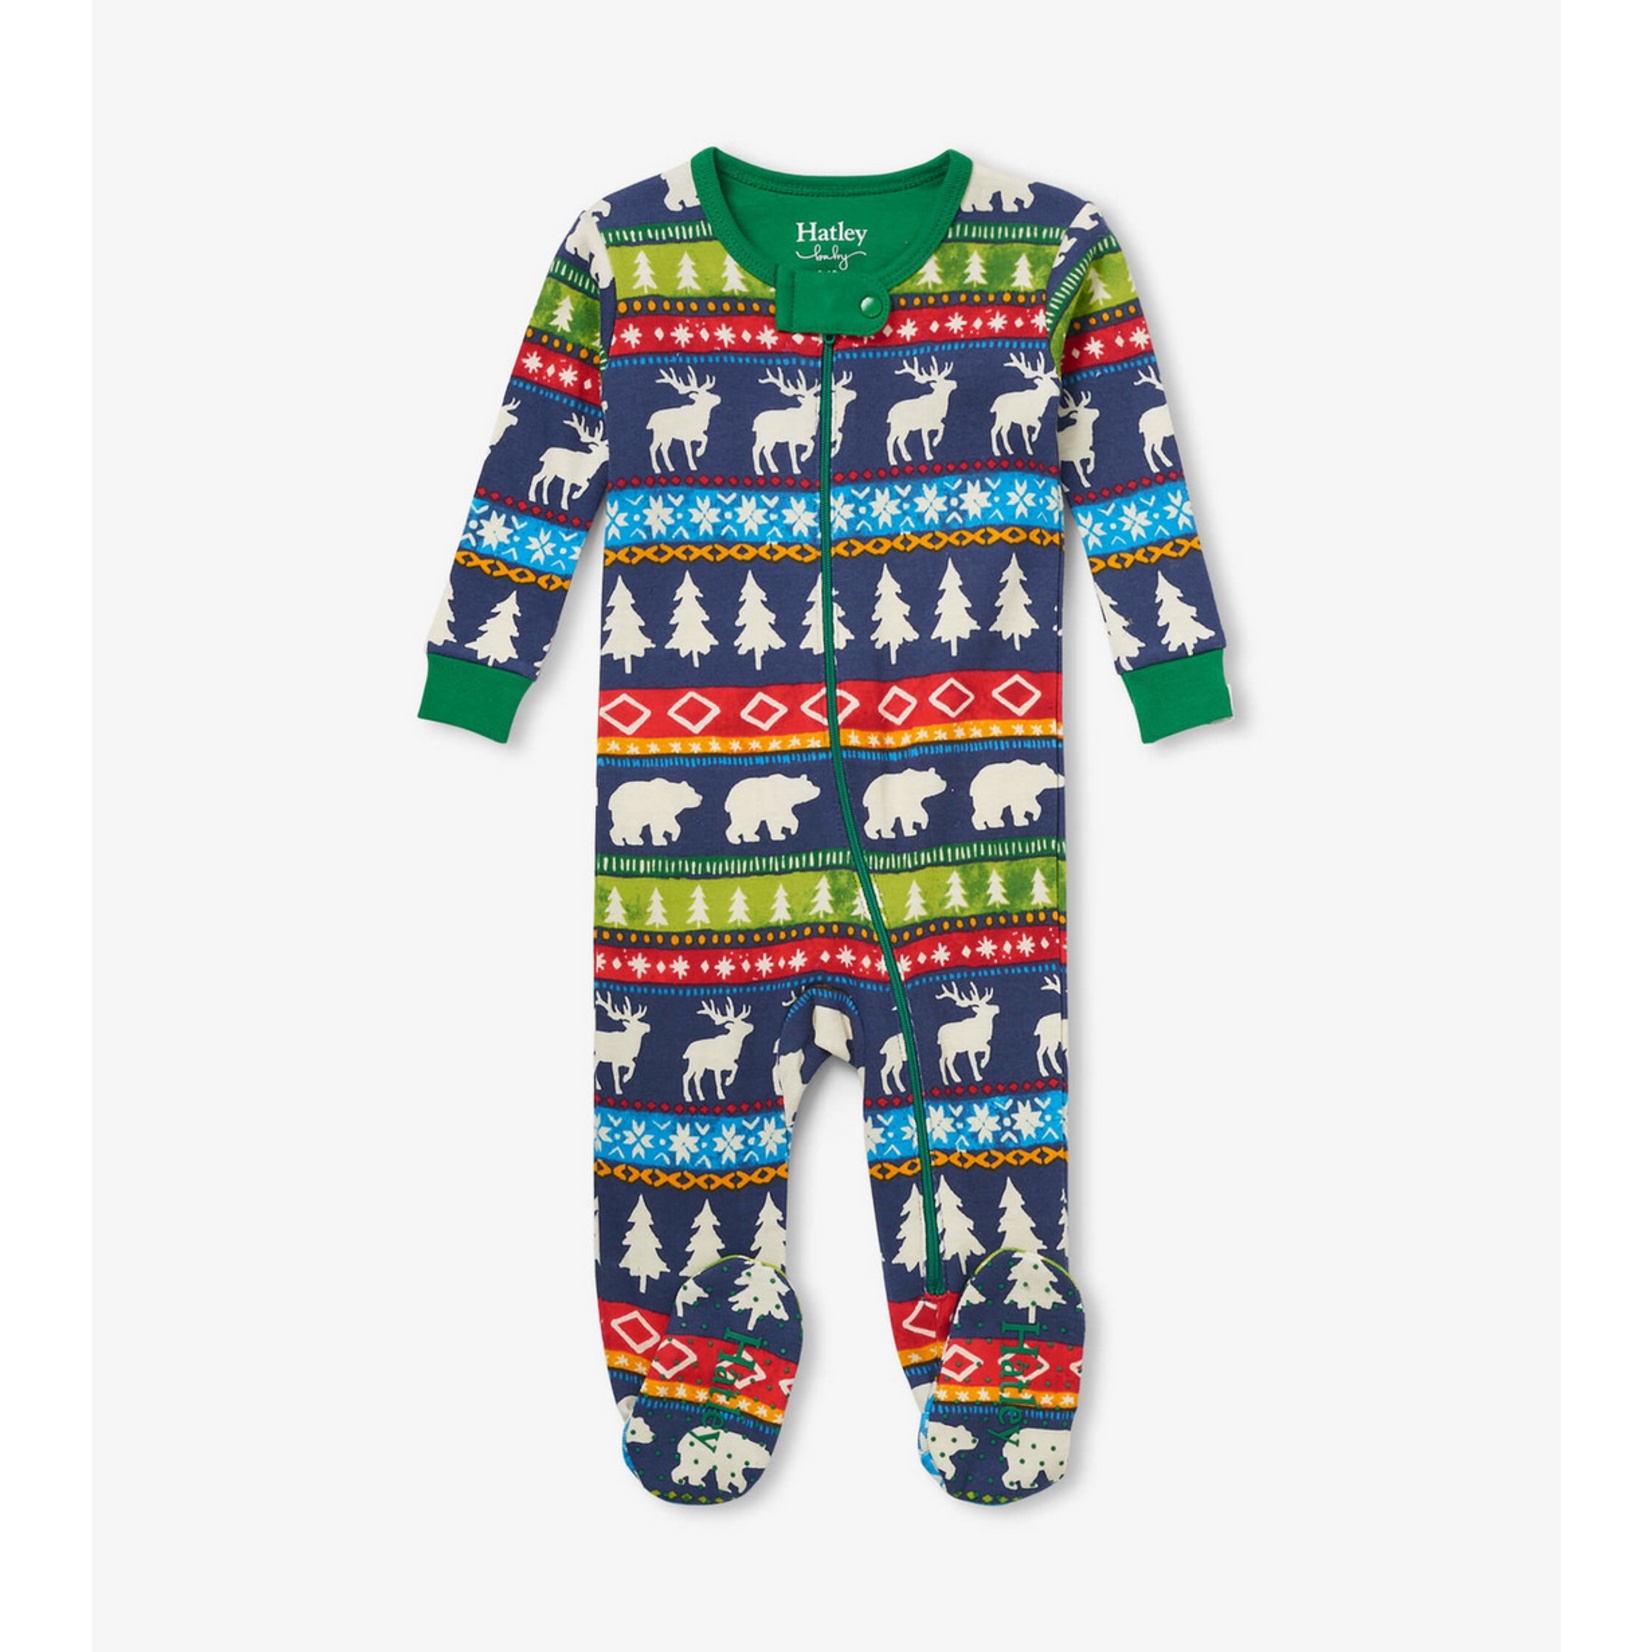 HATLEY NAVY PAINTED FAIRISLE BABY FOOTED COVERALL